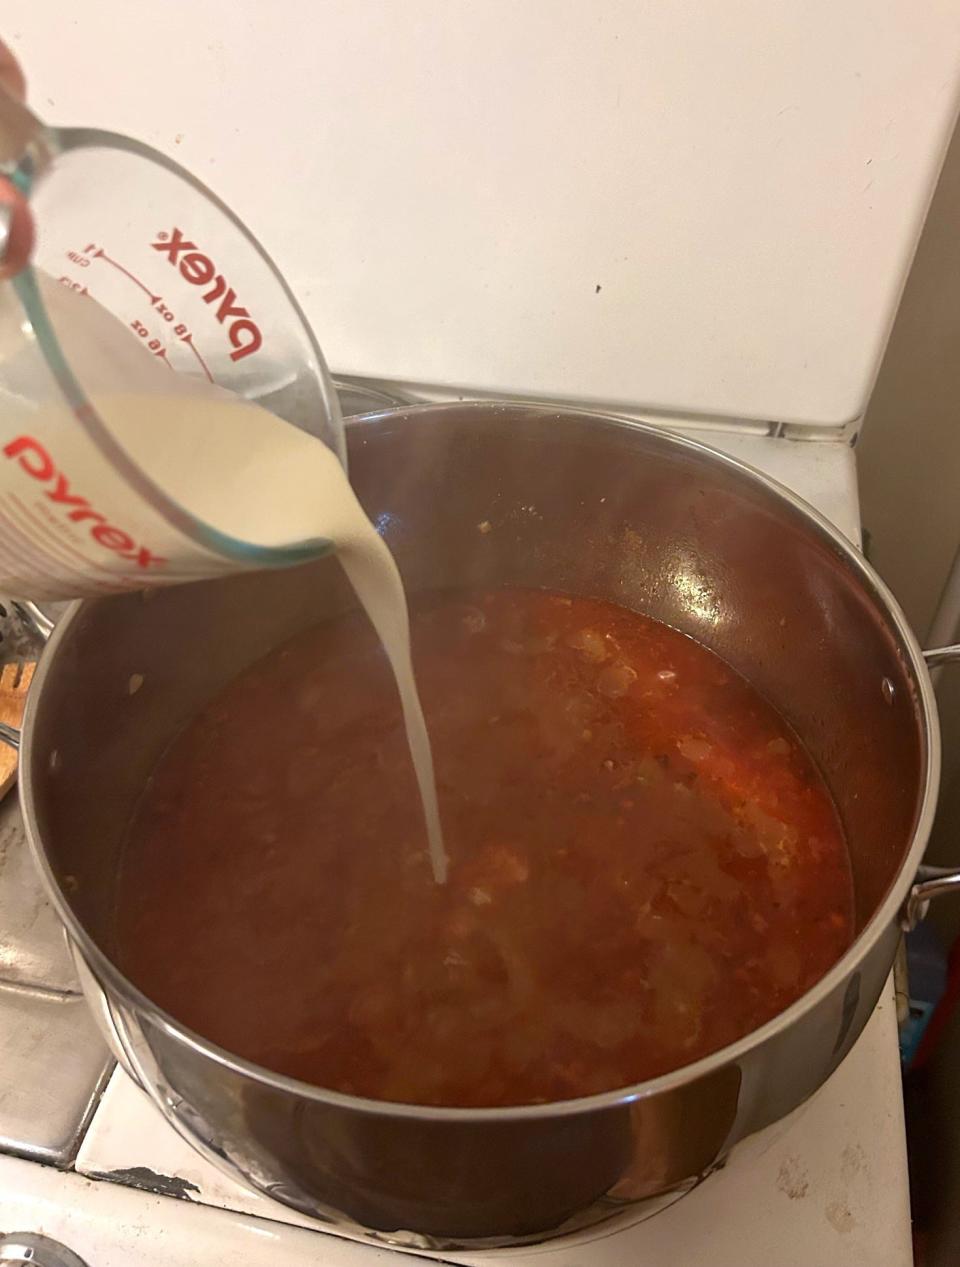 Adding cream to broth for Pioneer Woman's Lasagna Soup